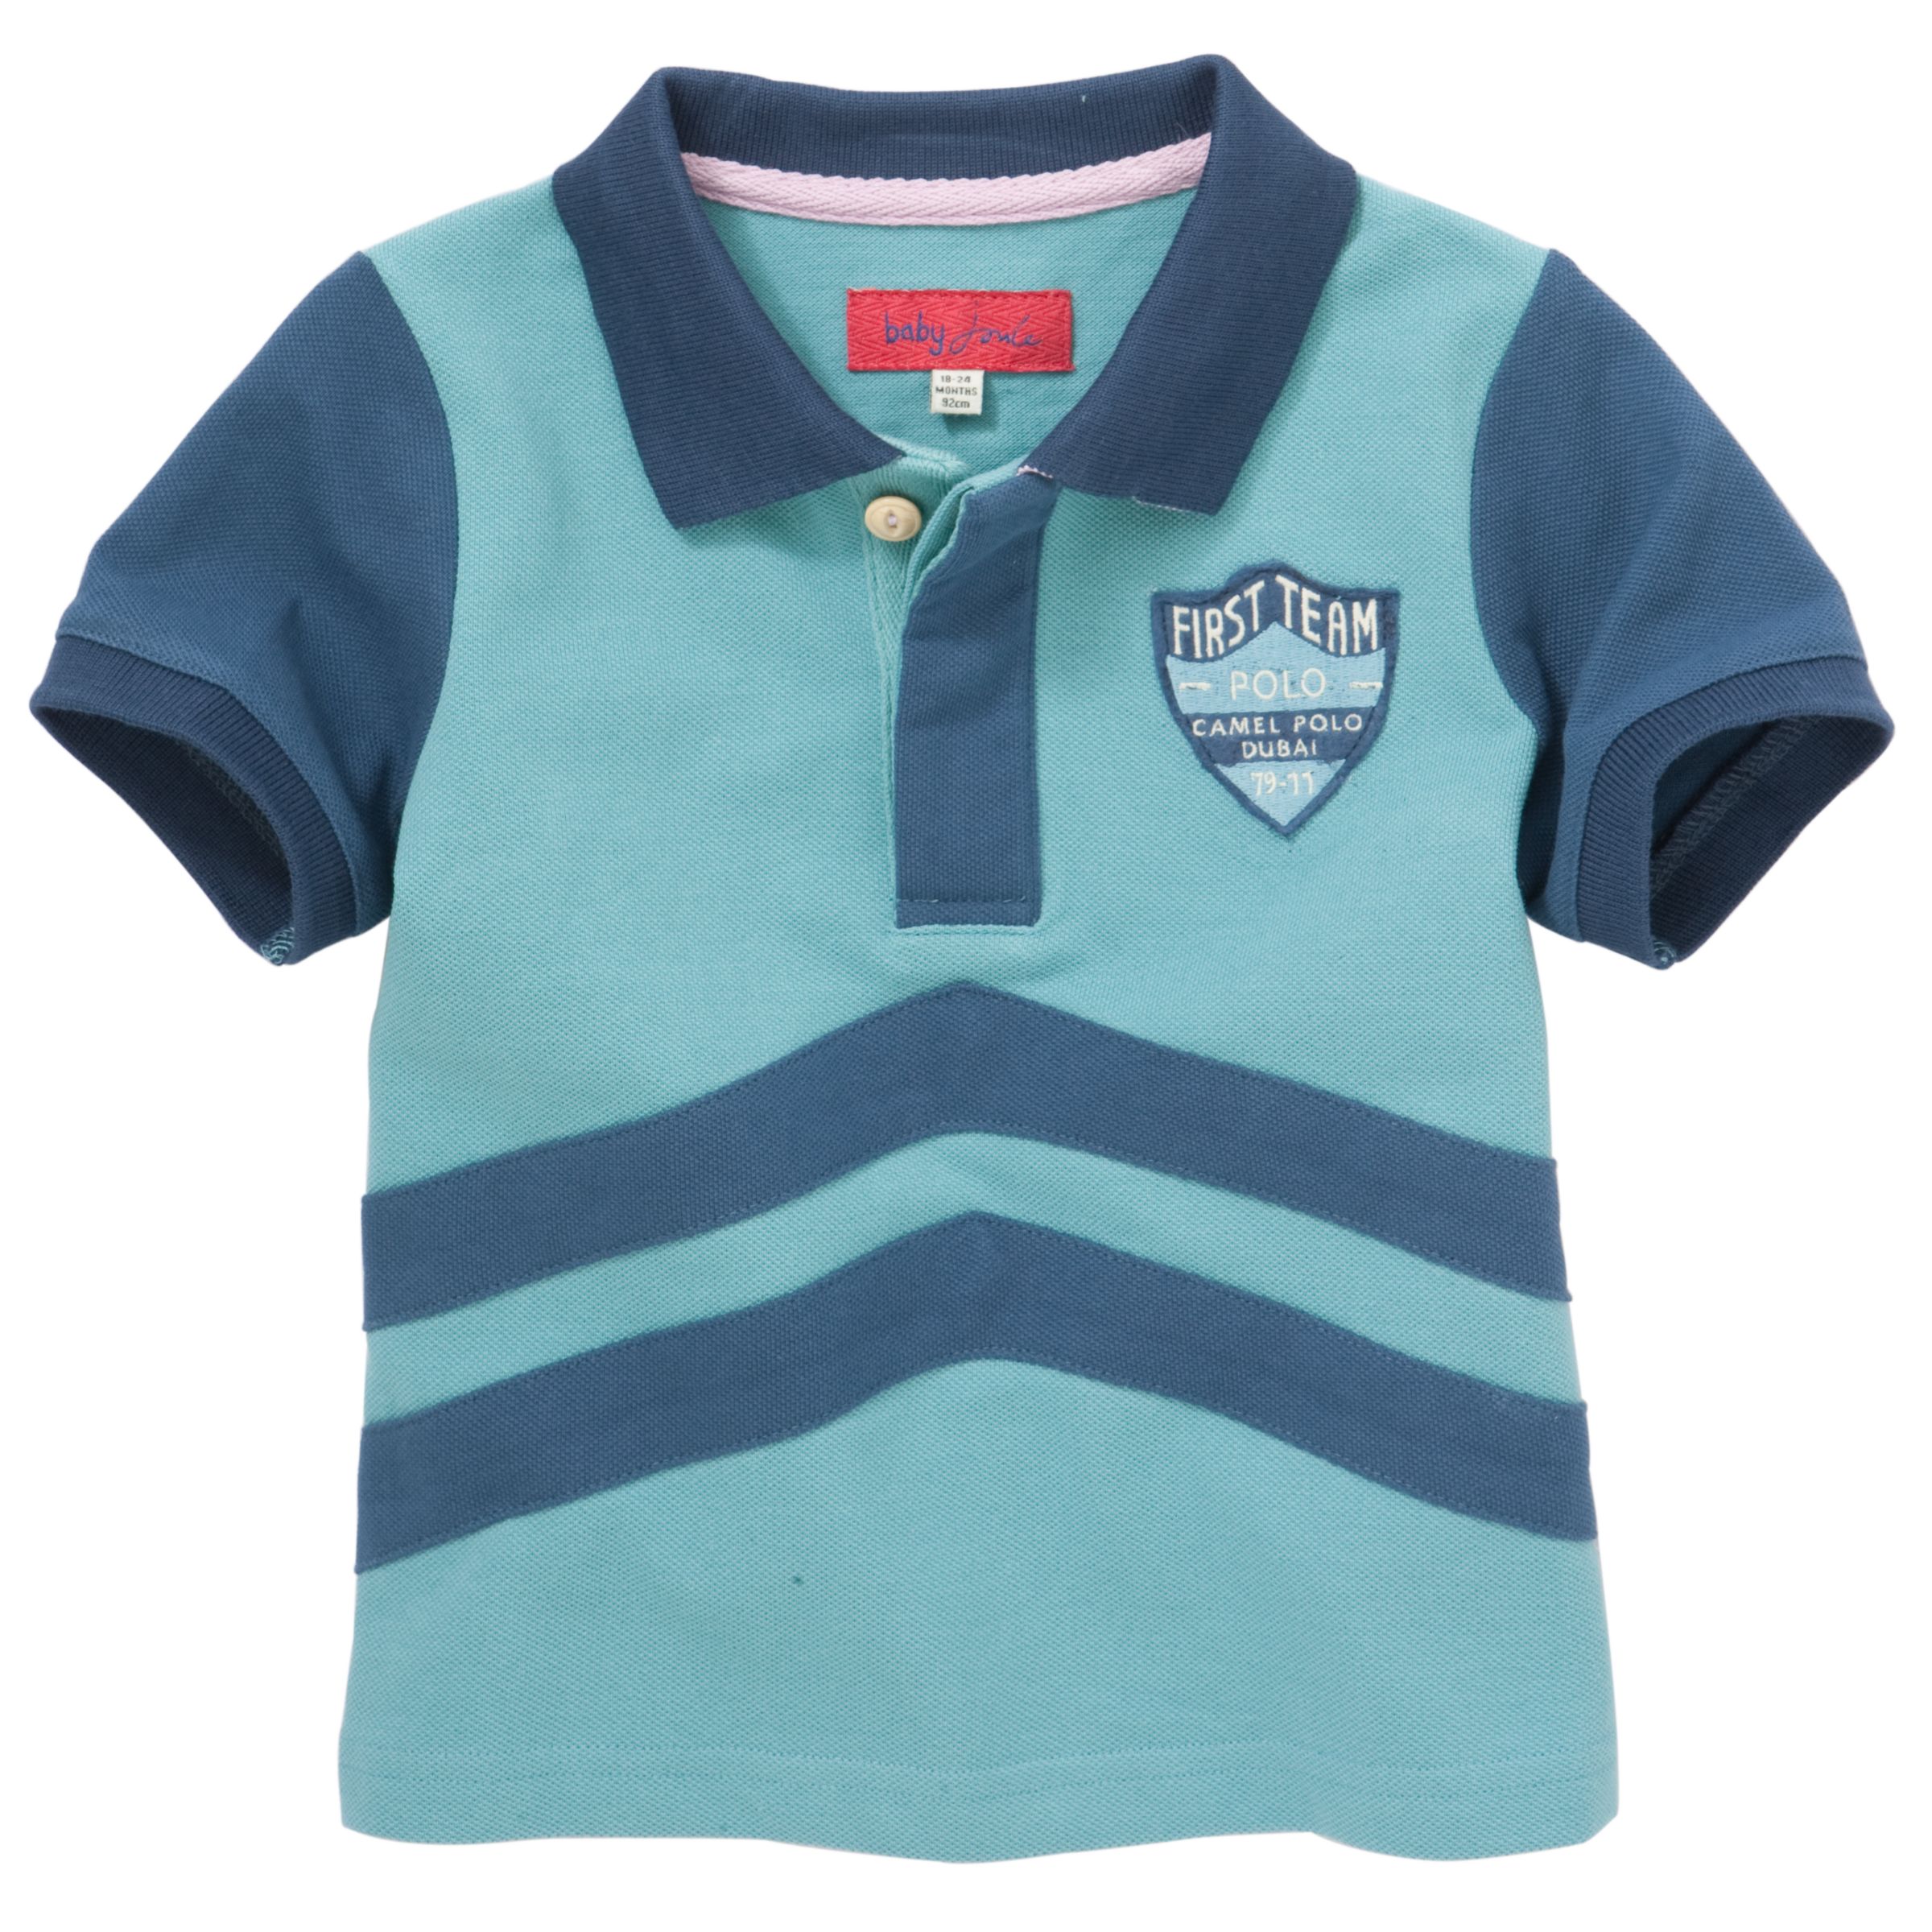 Baby Joules Rugby Shirt, Blue